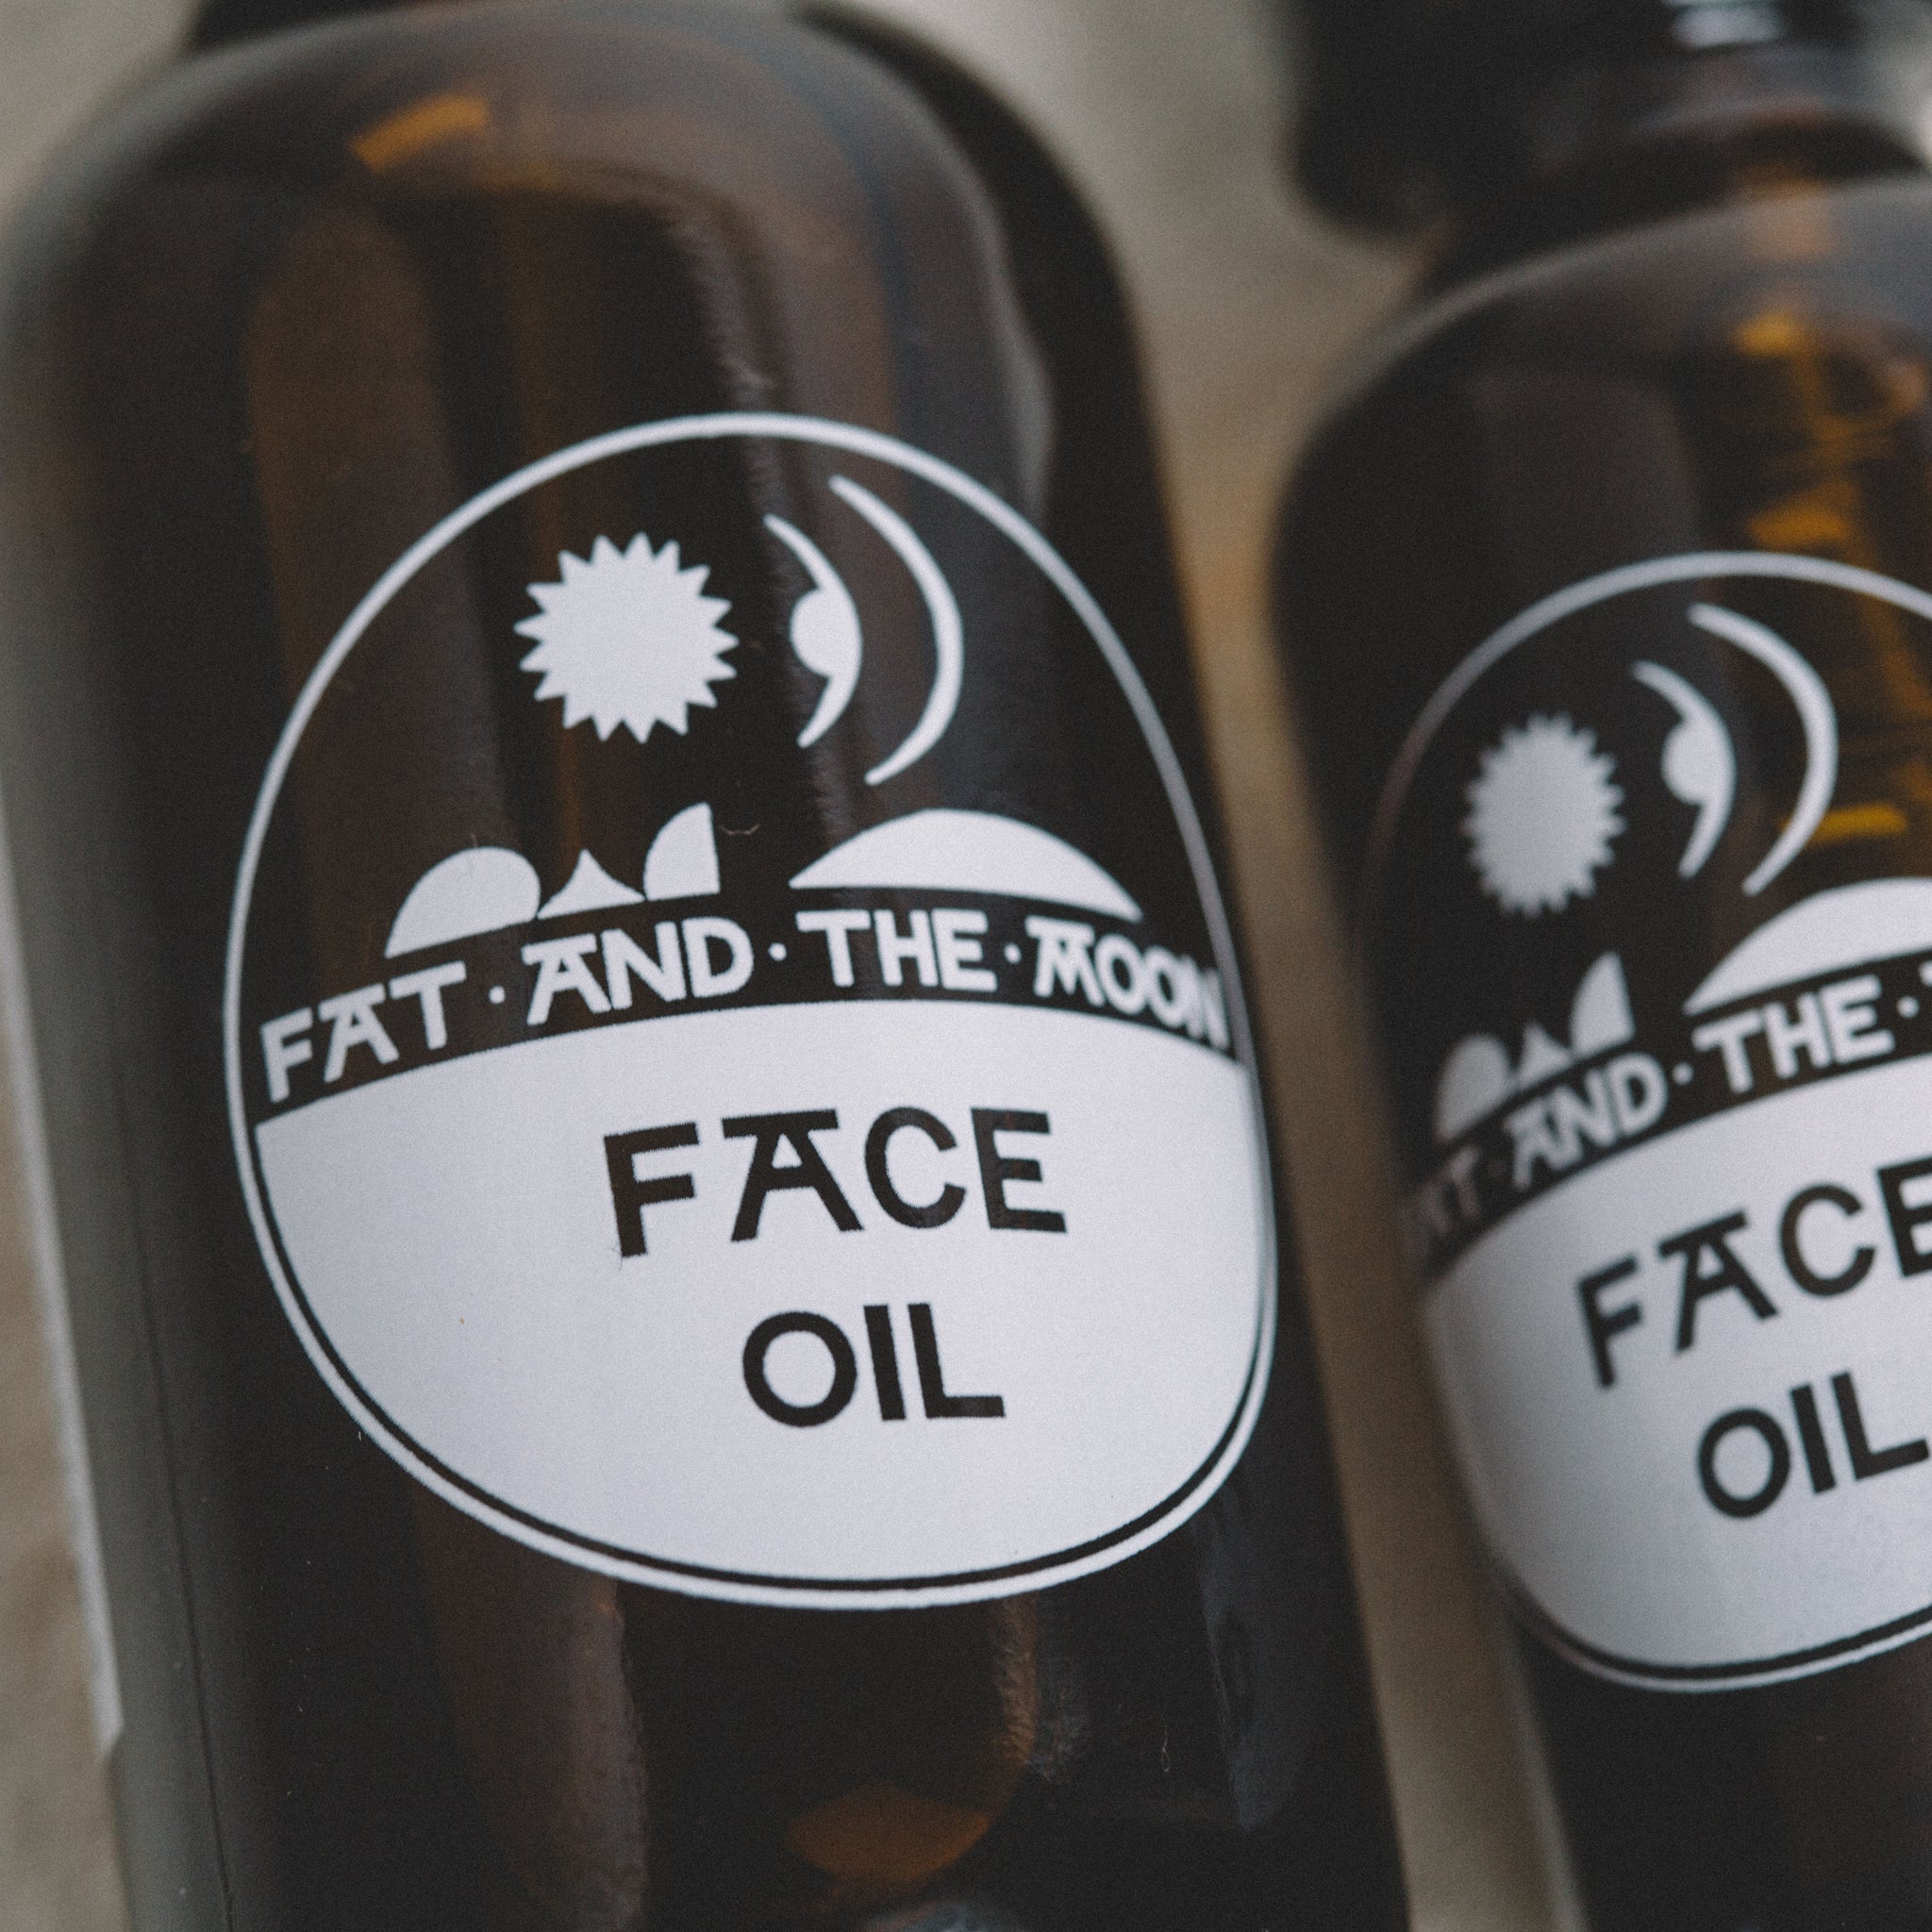 FACE OIL || FAT AND THE MOON